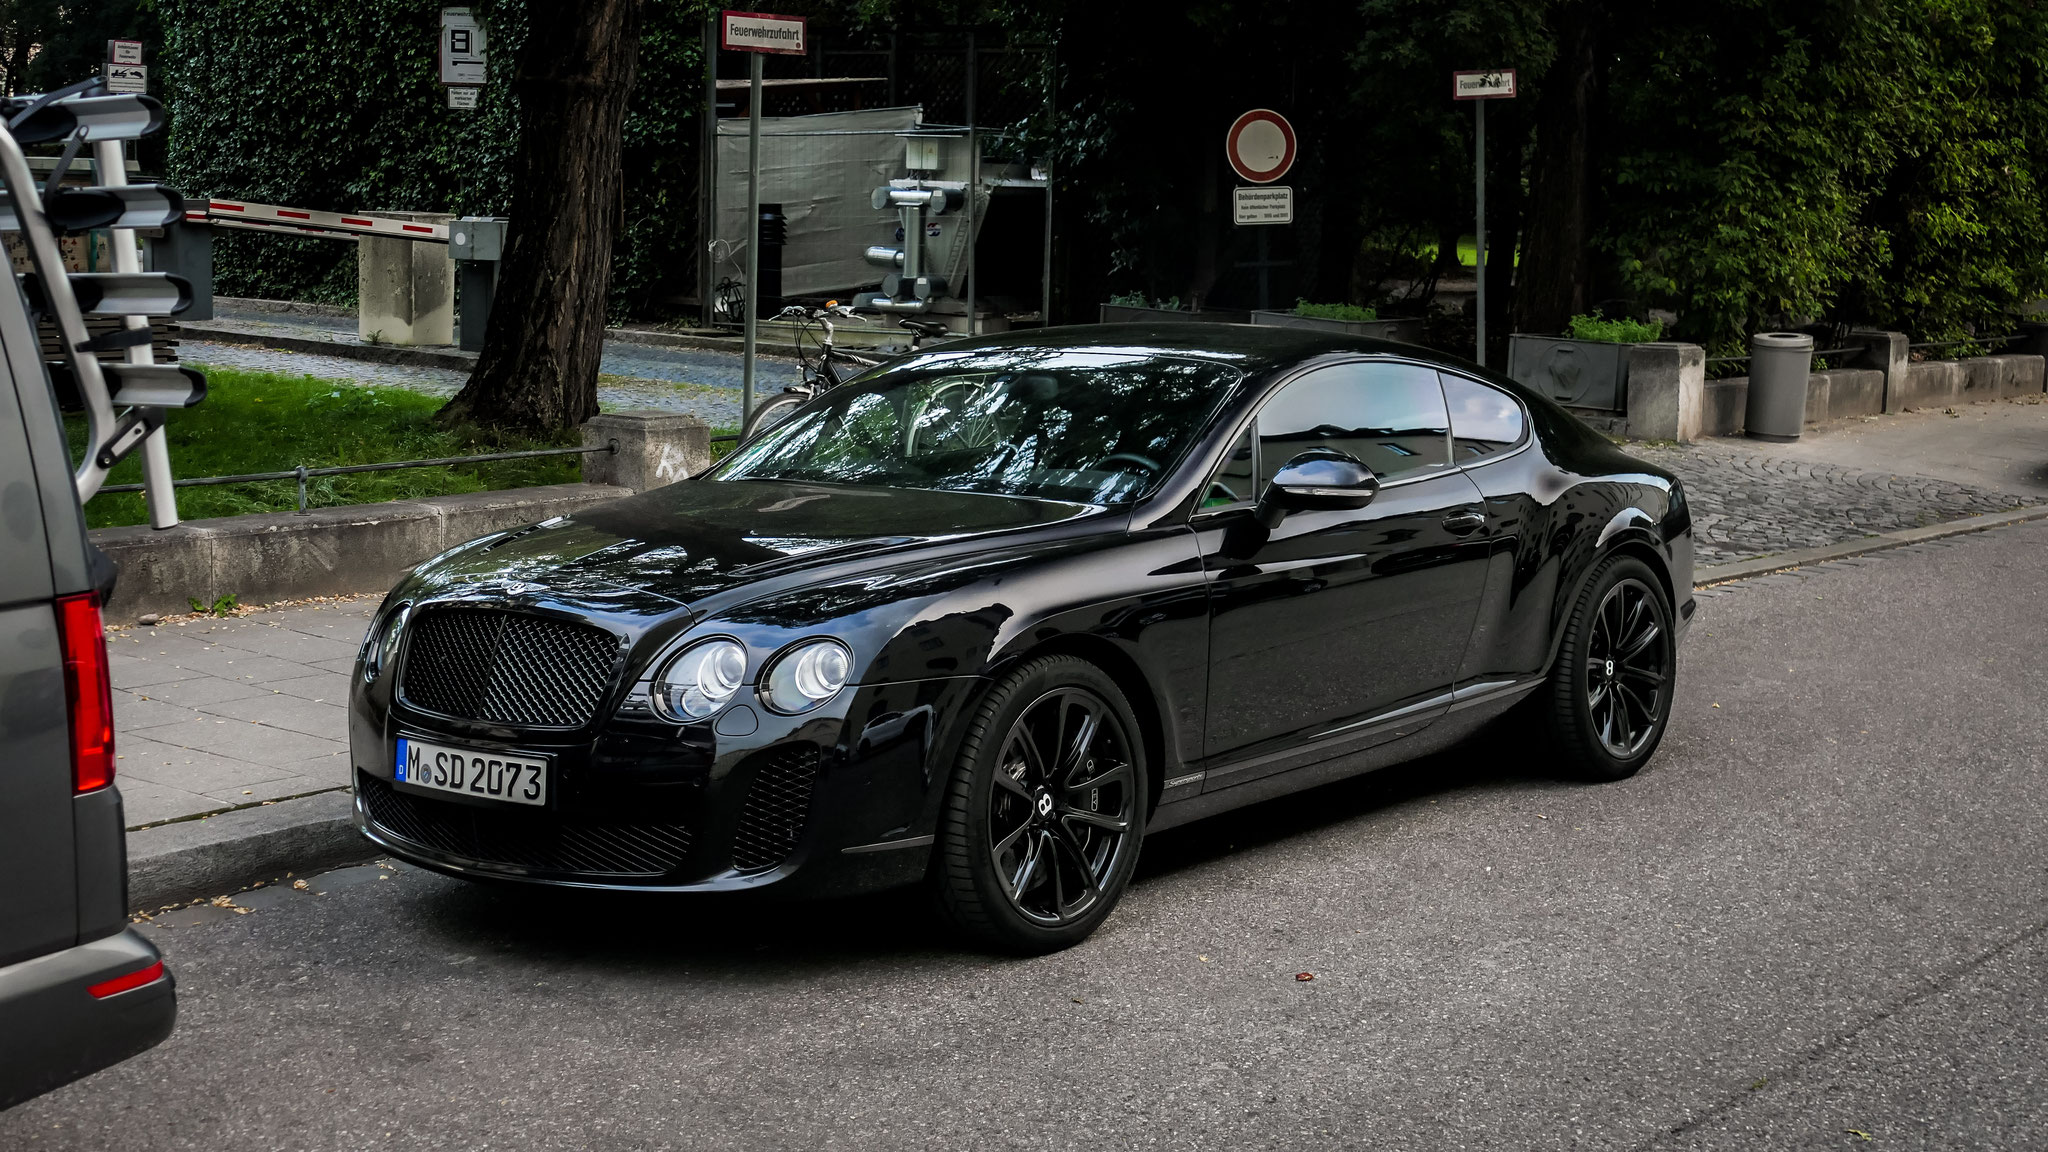 Bentley Continental GT Supersports - M-SD2073